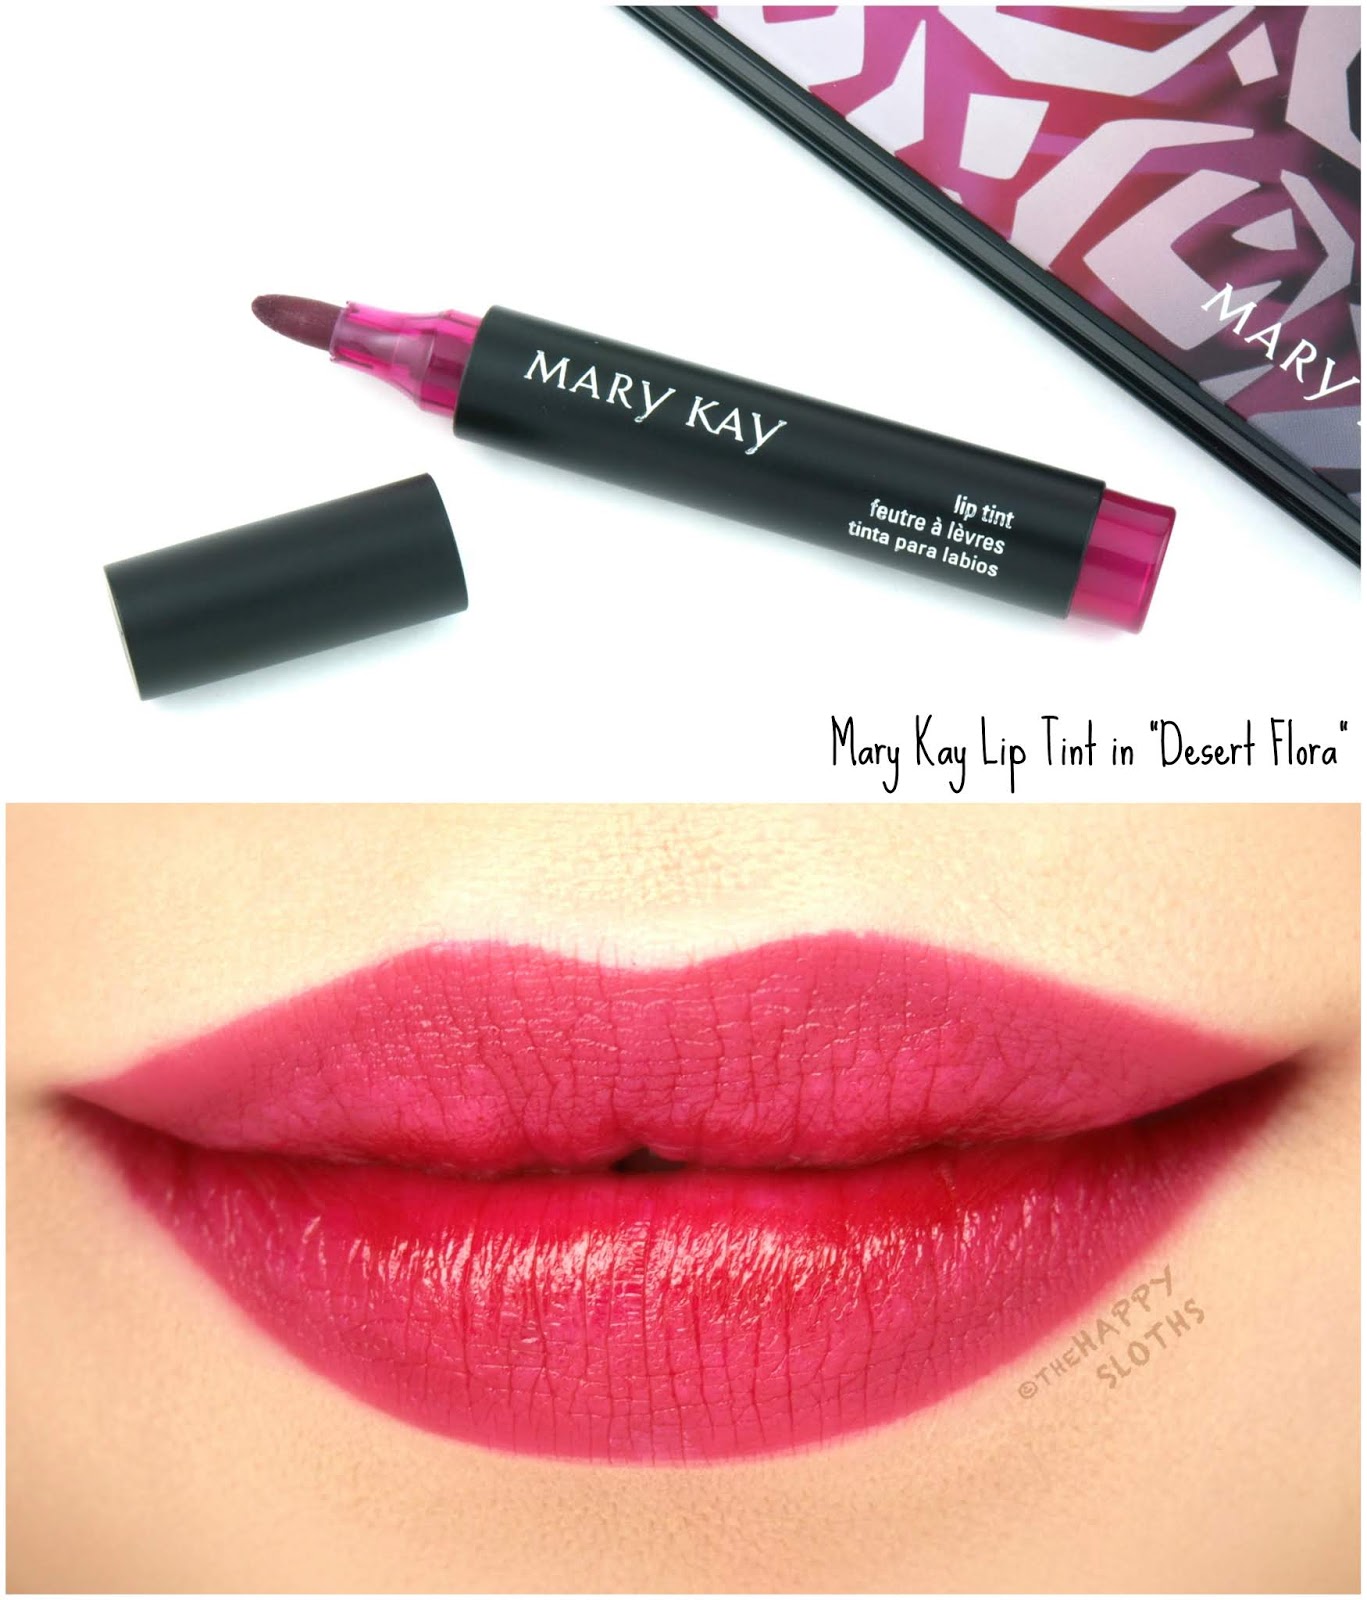 Mary Kay | Spring 2019 Lip Tint in "Desert Flora": Review and Swatches